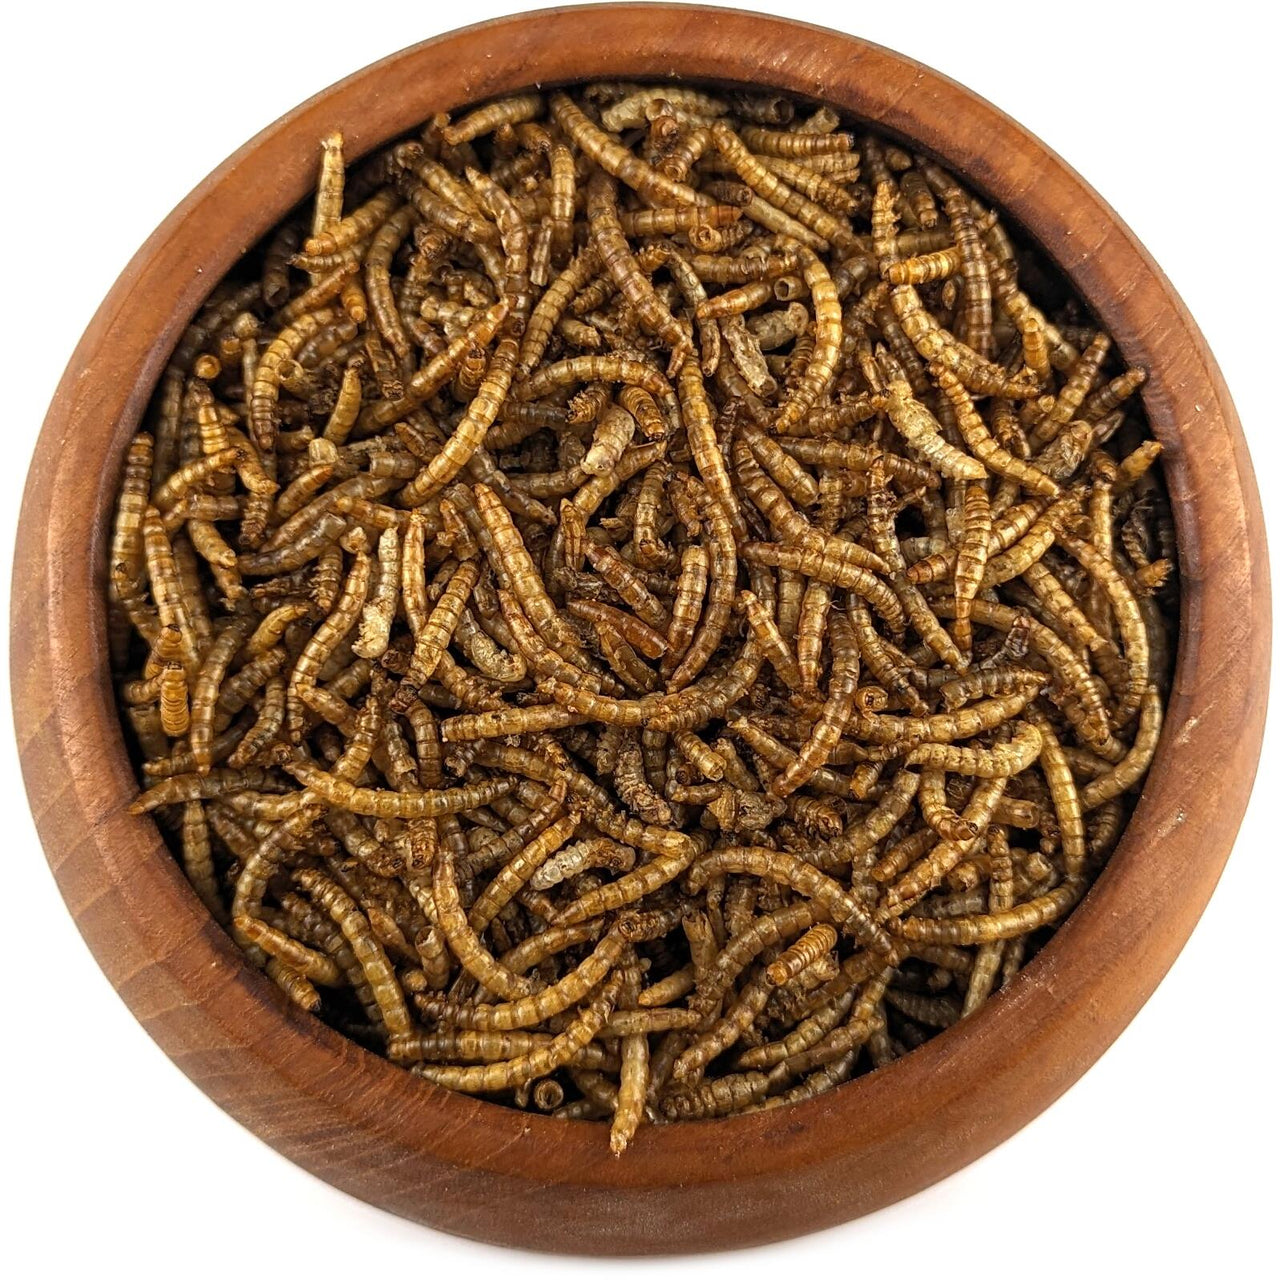 Dried Meal Worms, Loose